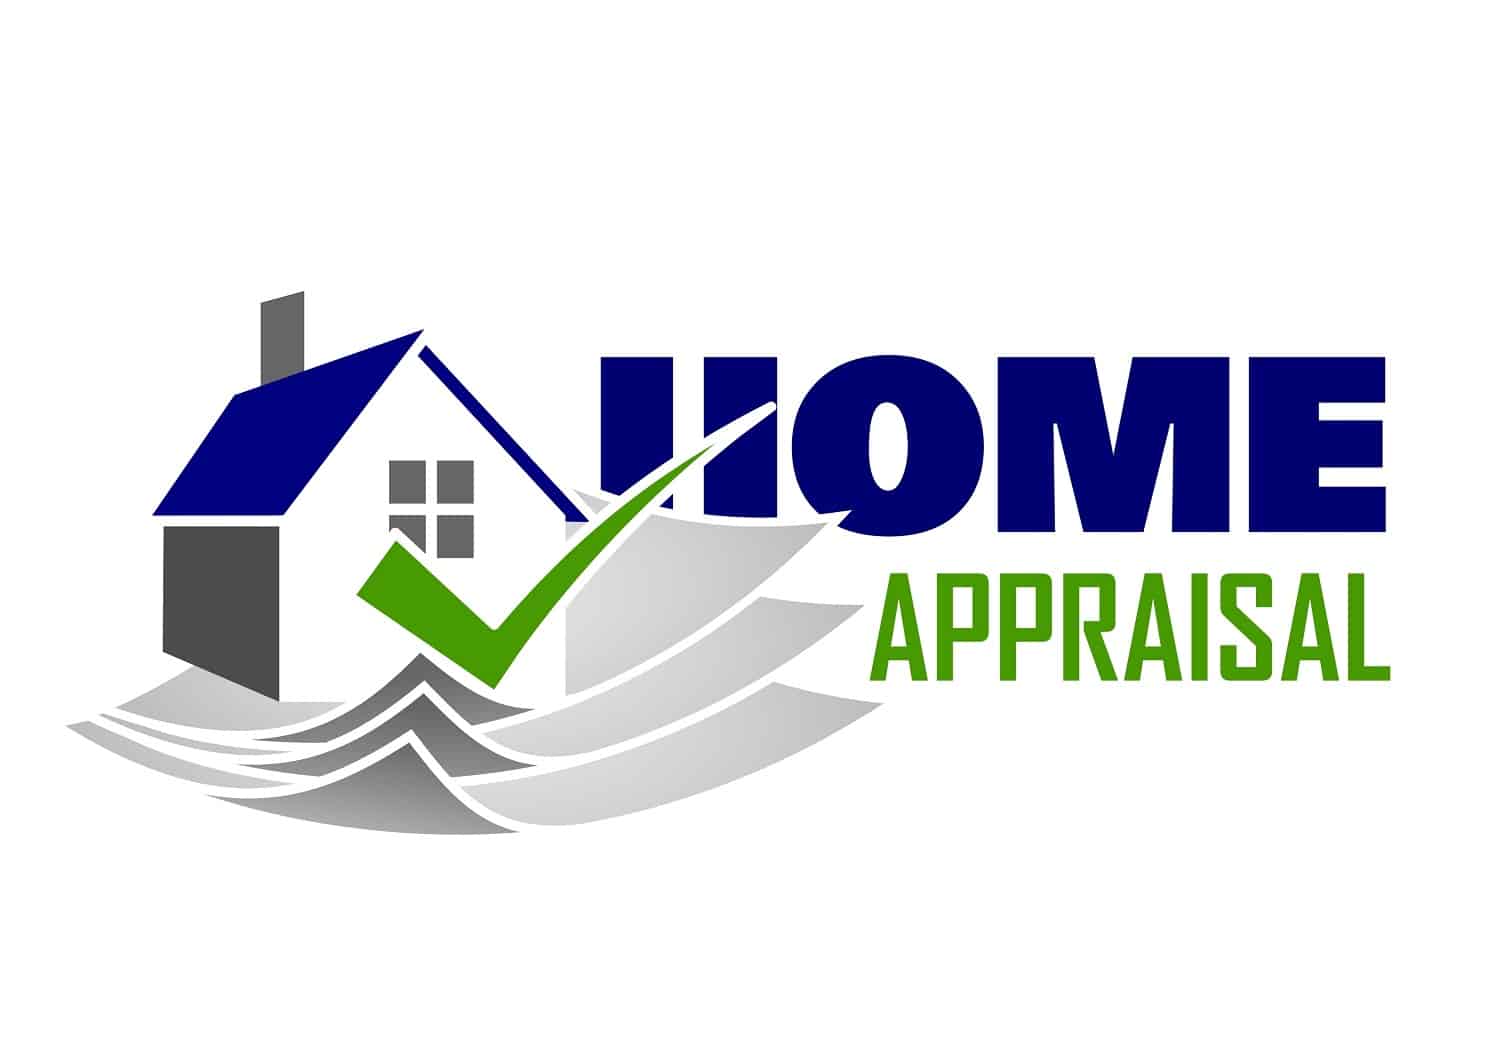 What is an Appraisal in Real Estate